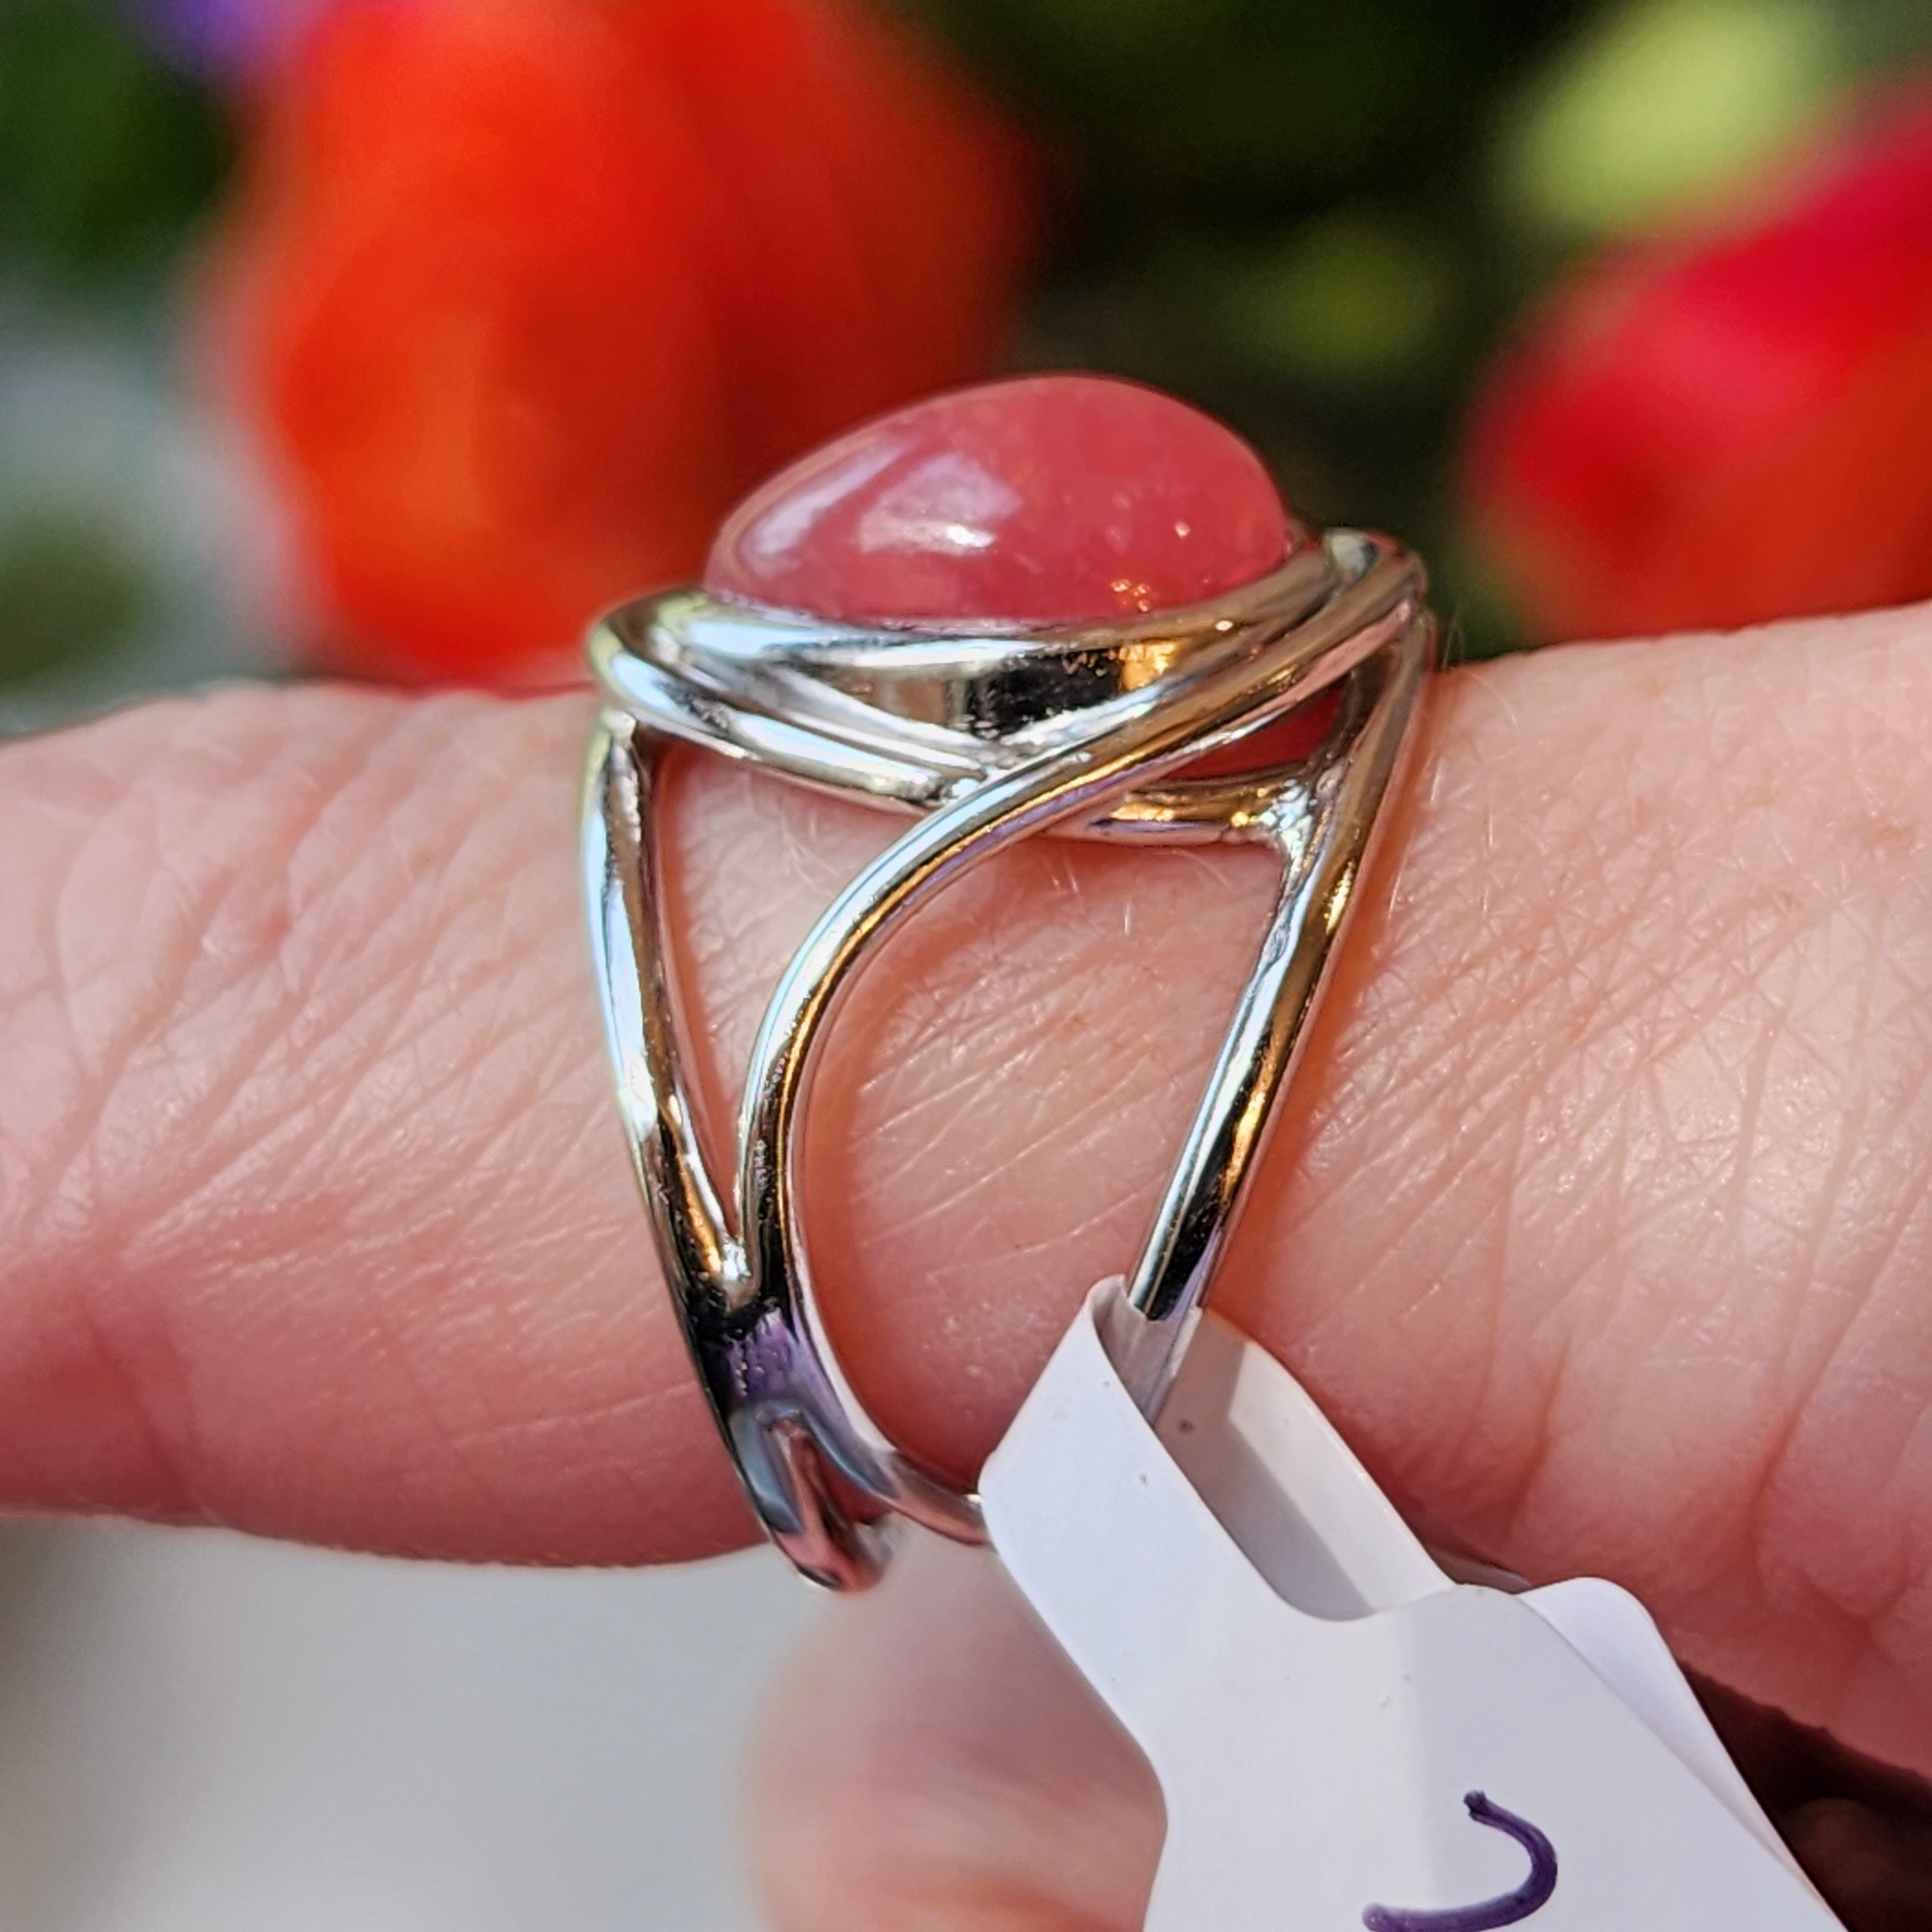 Gel Rhodochrosite Finger Cuff Adjustable Ring .925 Silver for Emotional Healing, Loving Yourself and Following your Heart